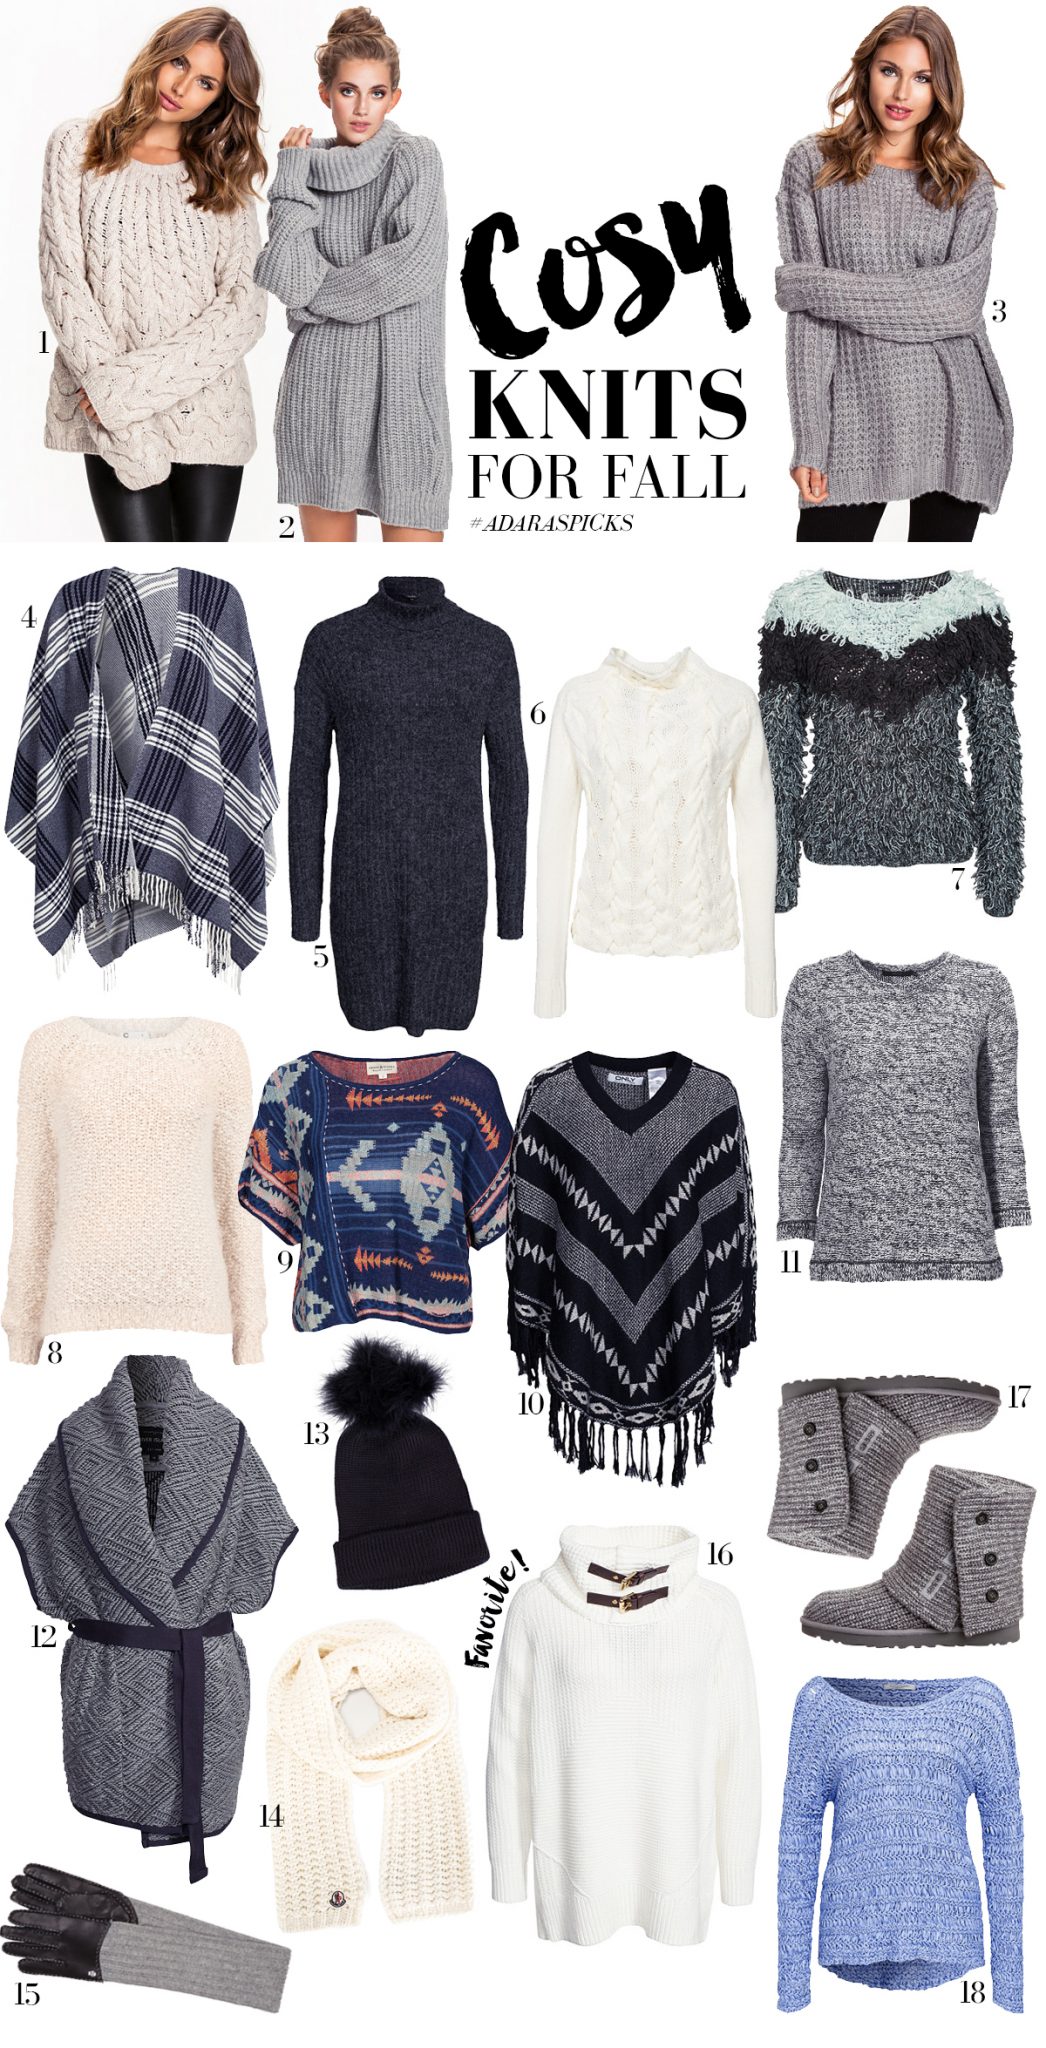 Cosy knits for fall